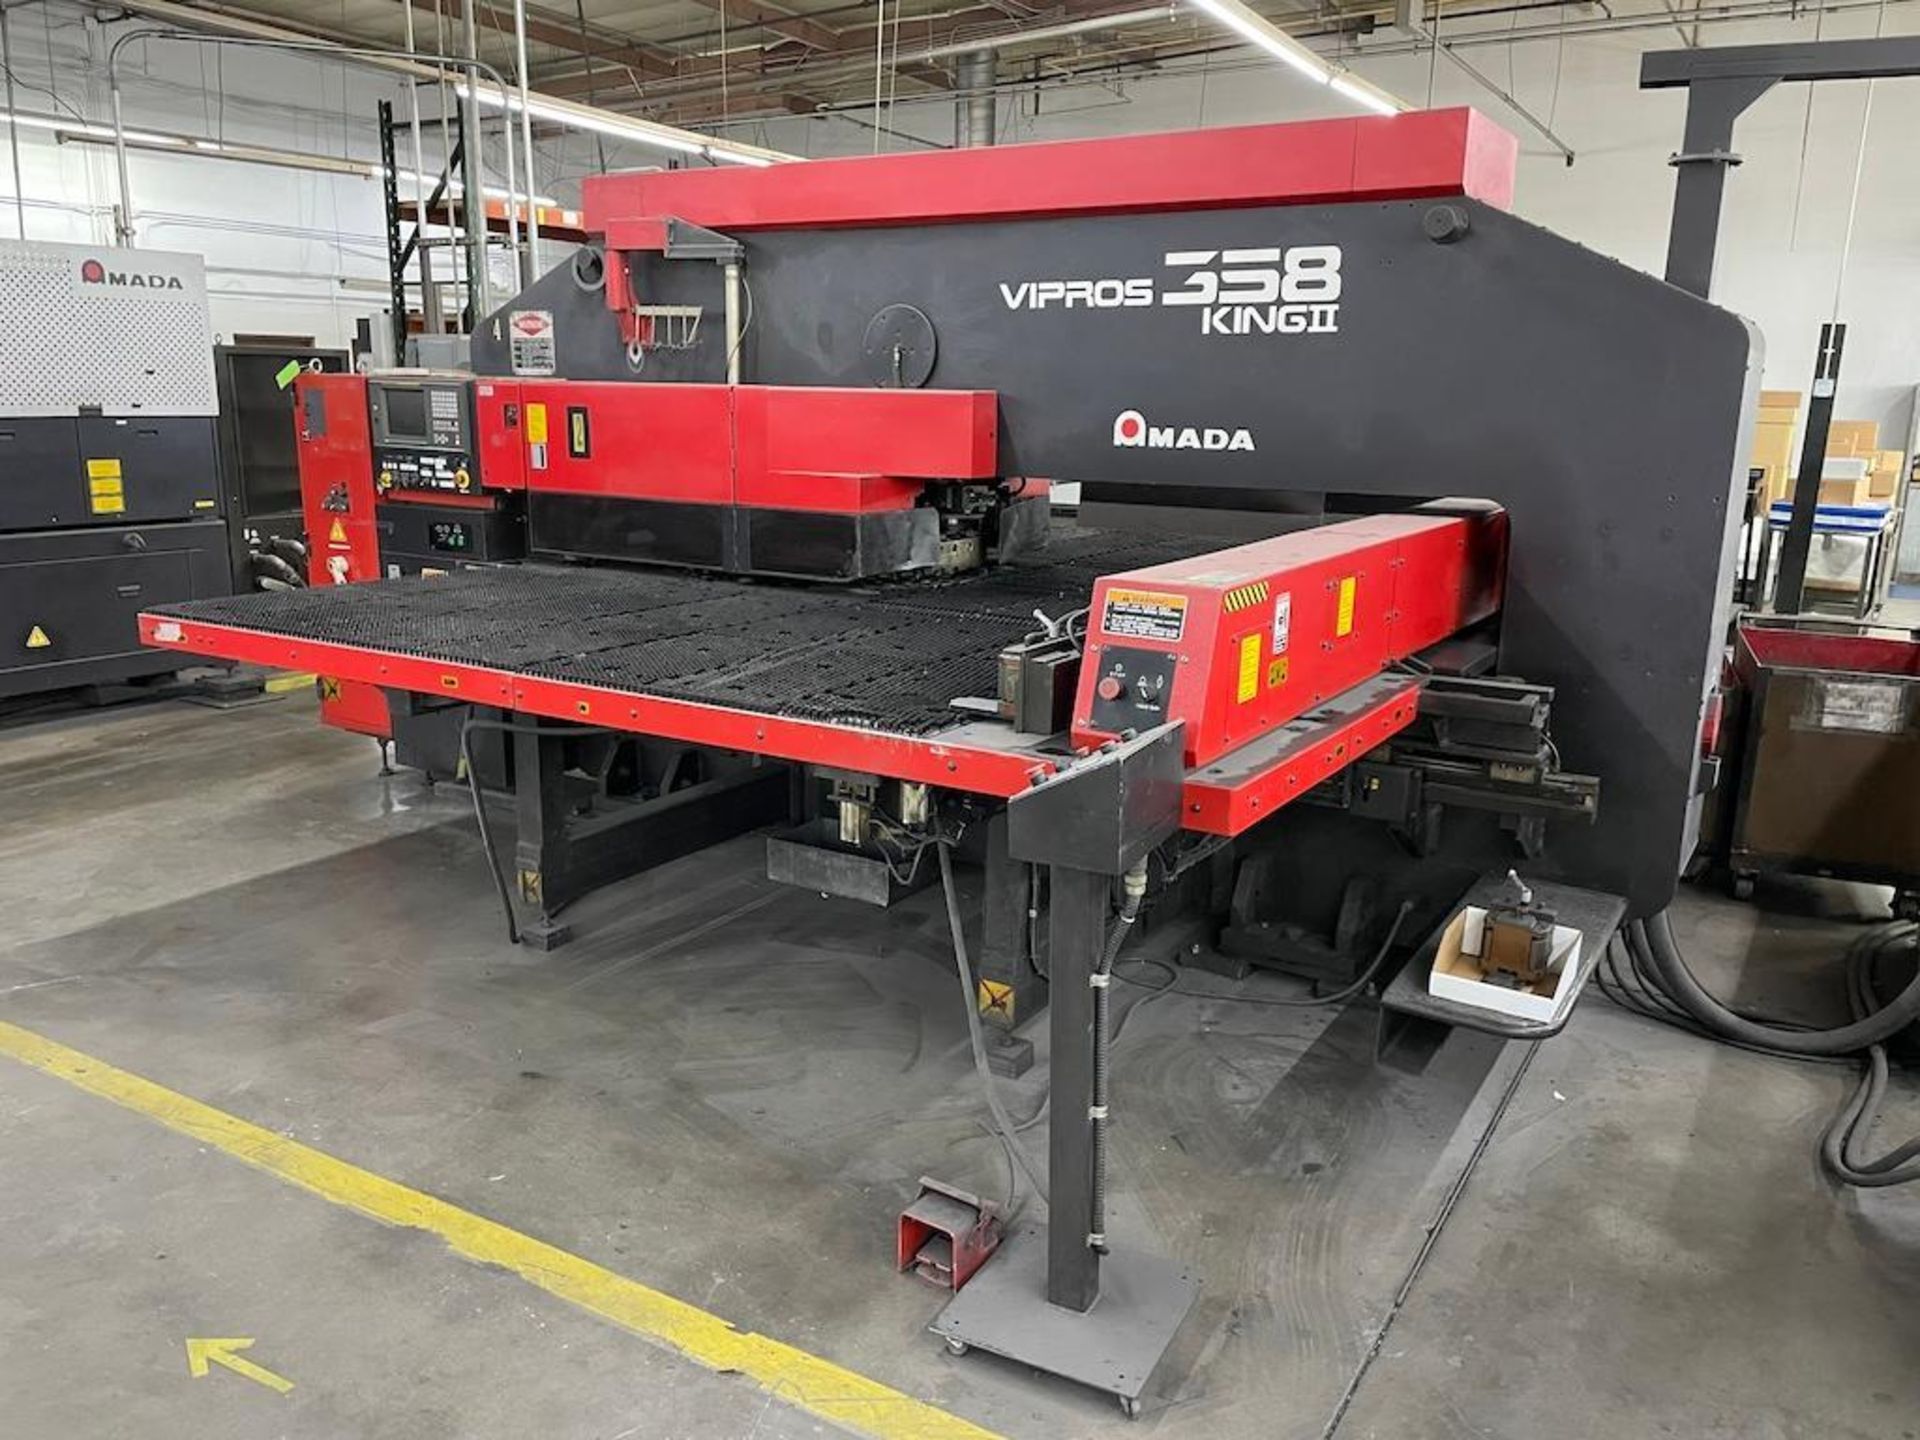 AMADA VIPROSS 358 KING II, 30 TON TURRET PUNCH, 58 STATION TURRET W 4 AUTO INDEX, TABLE TRAVEL 50 IN - Image 8 of 11